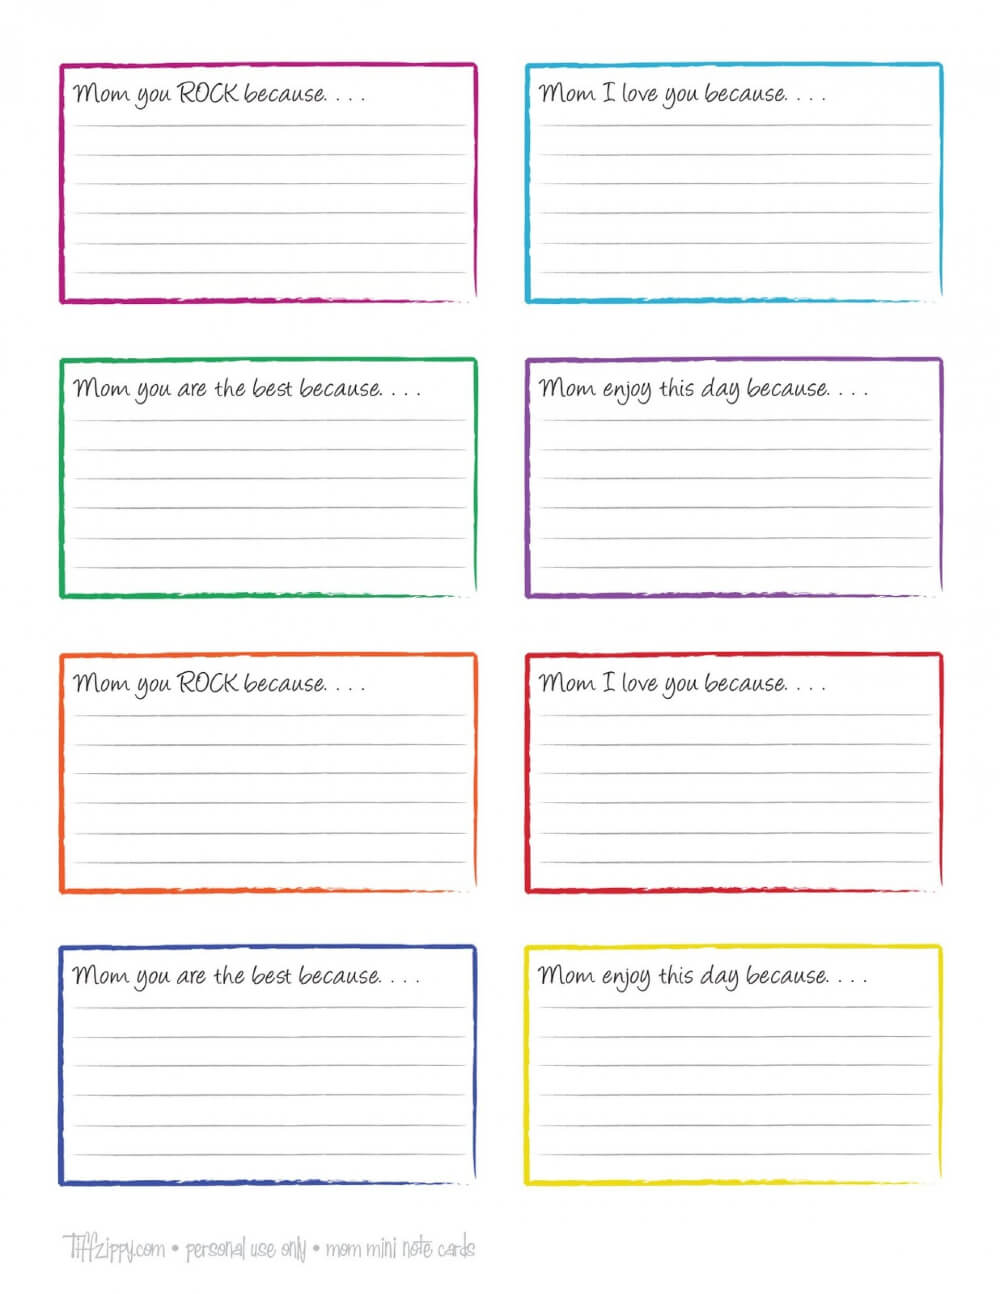 Examples Of Notecards For Research Paper Placement X Index With Blank Index Card Template